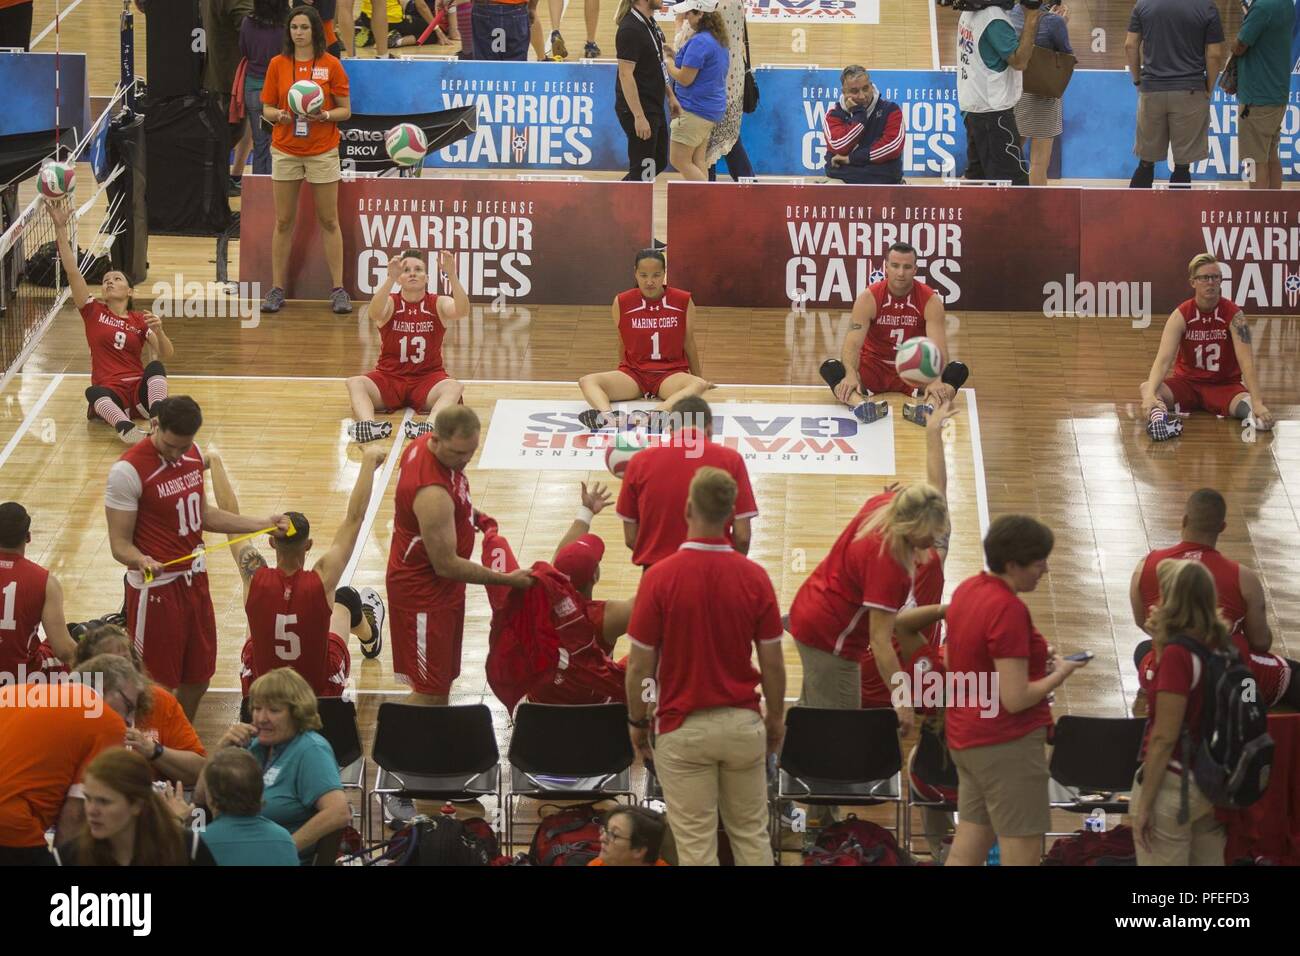 Team Marine Corps prepares for a 2018 DoD Warrior Games sitting volleyball preliminary match against Team SOCOM at the Air Force Academy in Colorado Springs, Colorado, June 3, 2018. The Warrior Games is an adaptive sports competition for wounded, ill and injured service members and veterans. Approximately 300 athletes representing teams from the Marine Corps, Navy, Army, Air Force, Special Operations Command, United Kingdom Armed Forces, Canadian Armed Forces, and the Australian Defence Force will compete June 1 - June 9 in archery, cycling, track, field, shooting, sitting volleyball, swimming Stock Photo